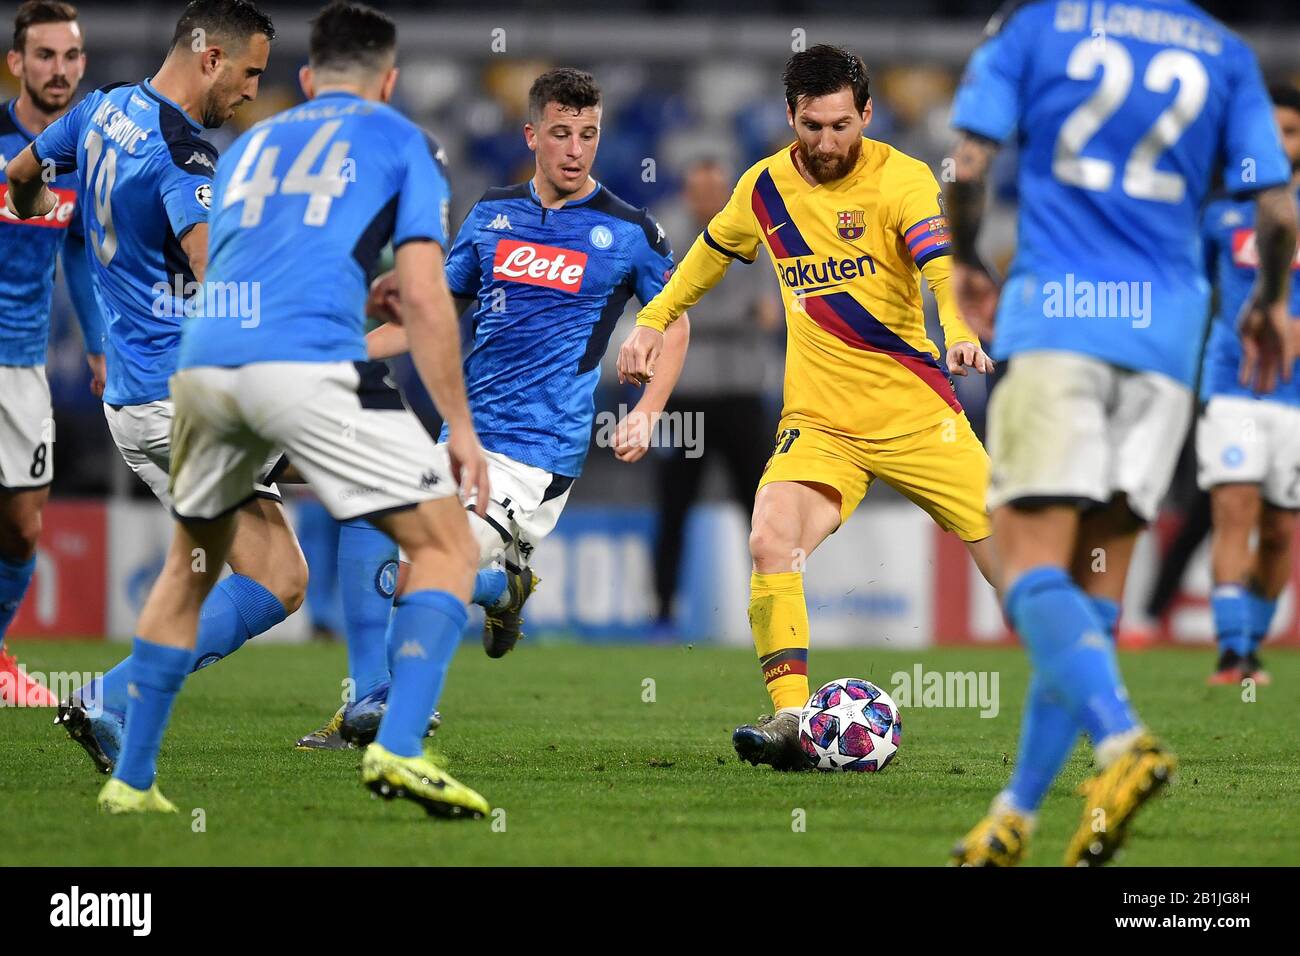 Napoli, Italy. 25th Feb, 2020. Lionel Messi of FC Barcelona surrounded Diego Demme and other Napoli players Napoli 25-02-2020 Stadio San Paolo Football Champions League 2019/2020 Round 16, 1st leg